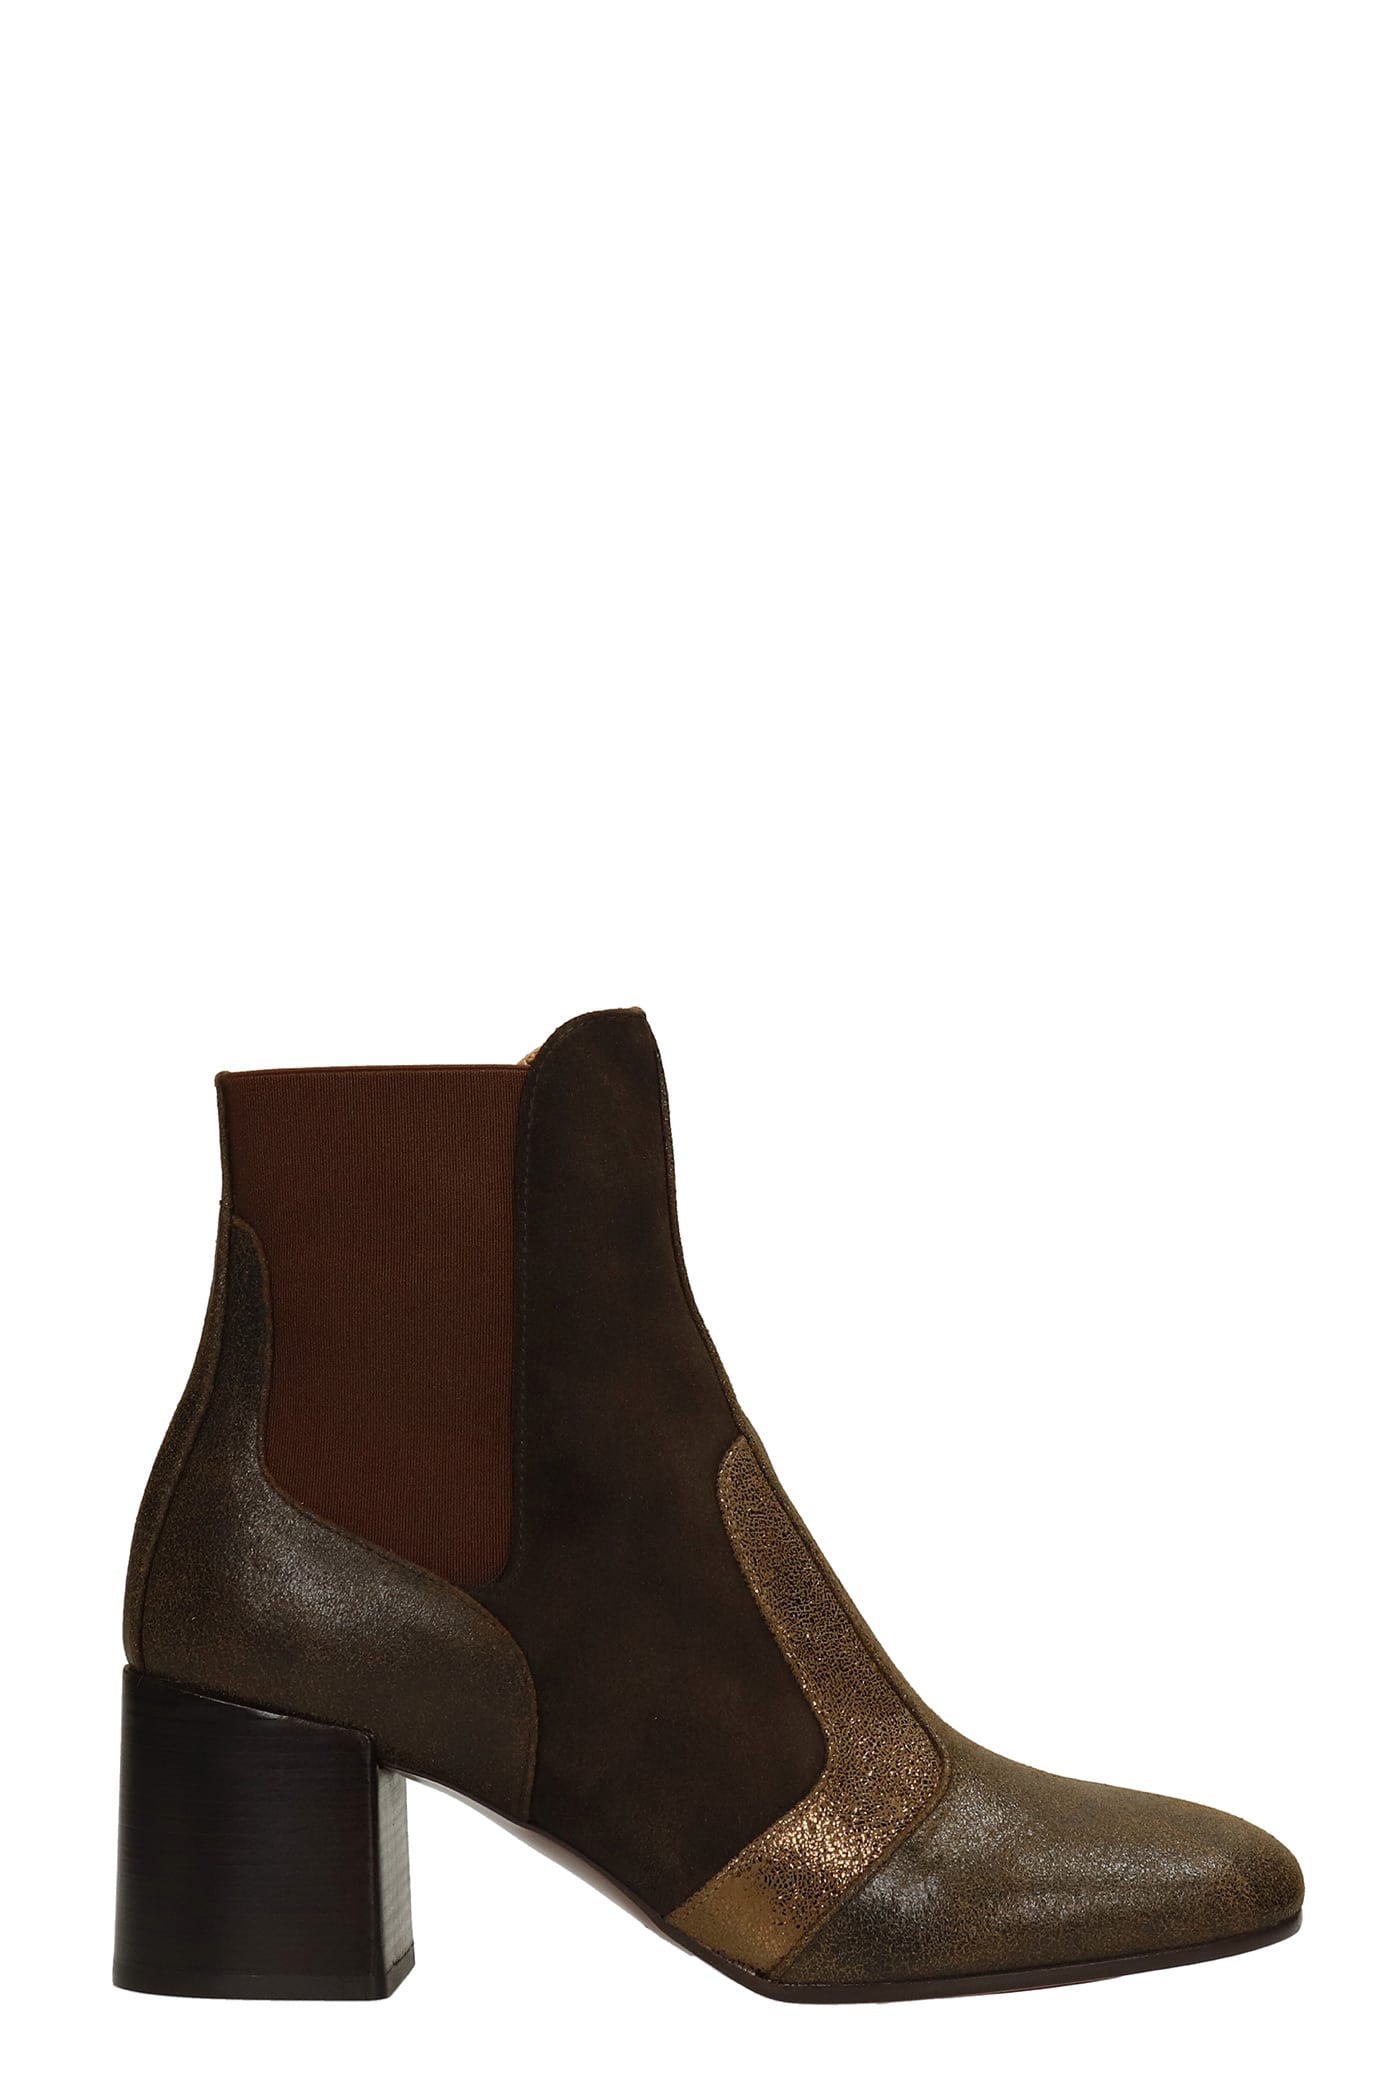 Chie Mihara Umay High Heels Ankle Boots In Brown Suede And Leather